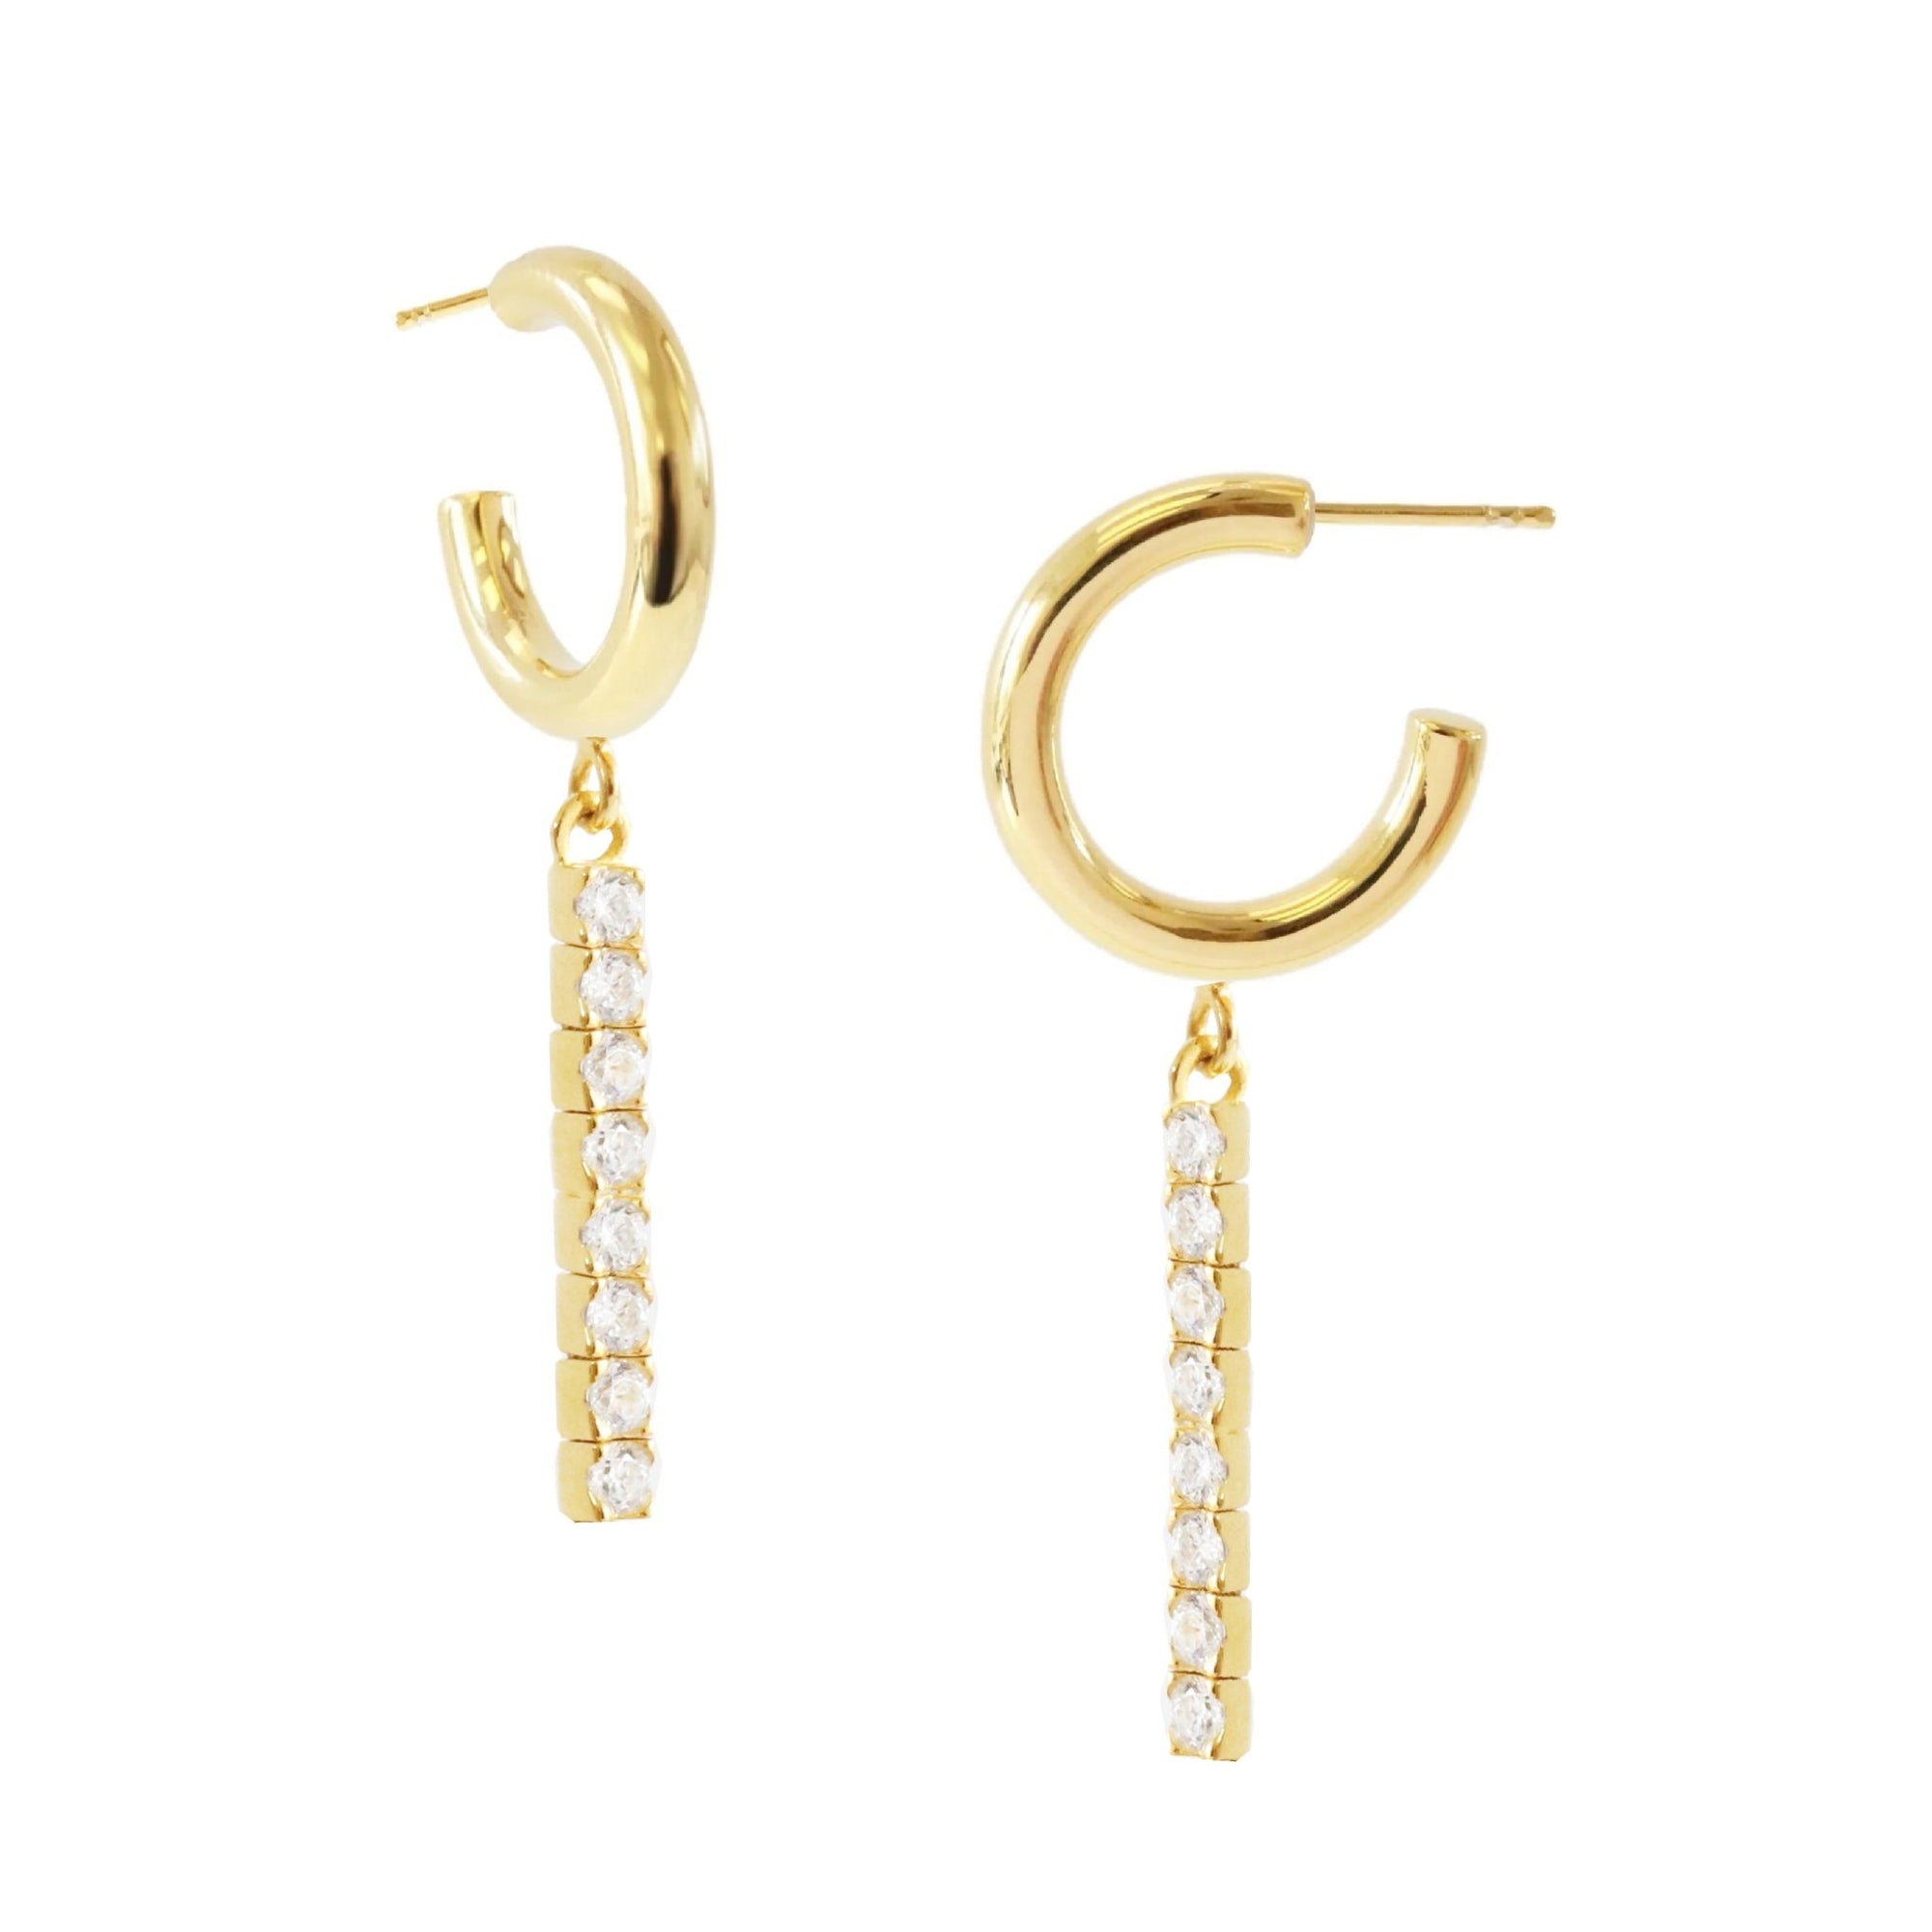 LOVE TENNIS HOOPS - CUBIC ZIRCONIA & GOLD - SO PRETTY CARA COTTER